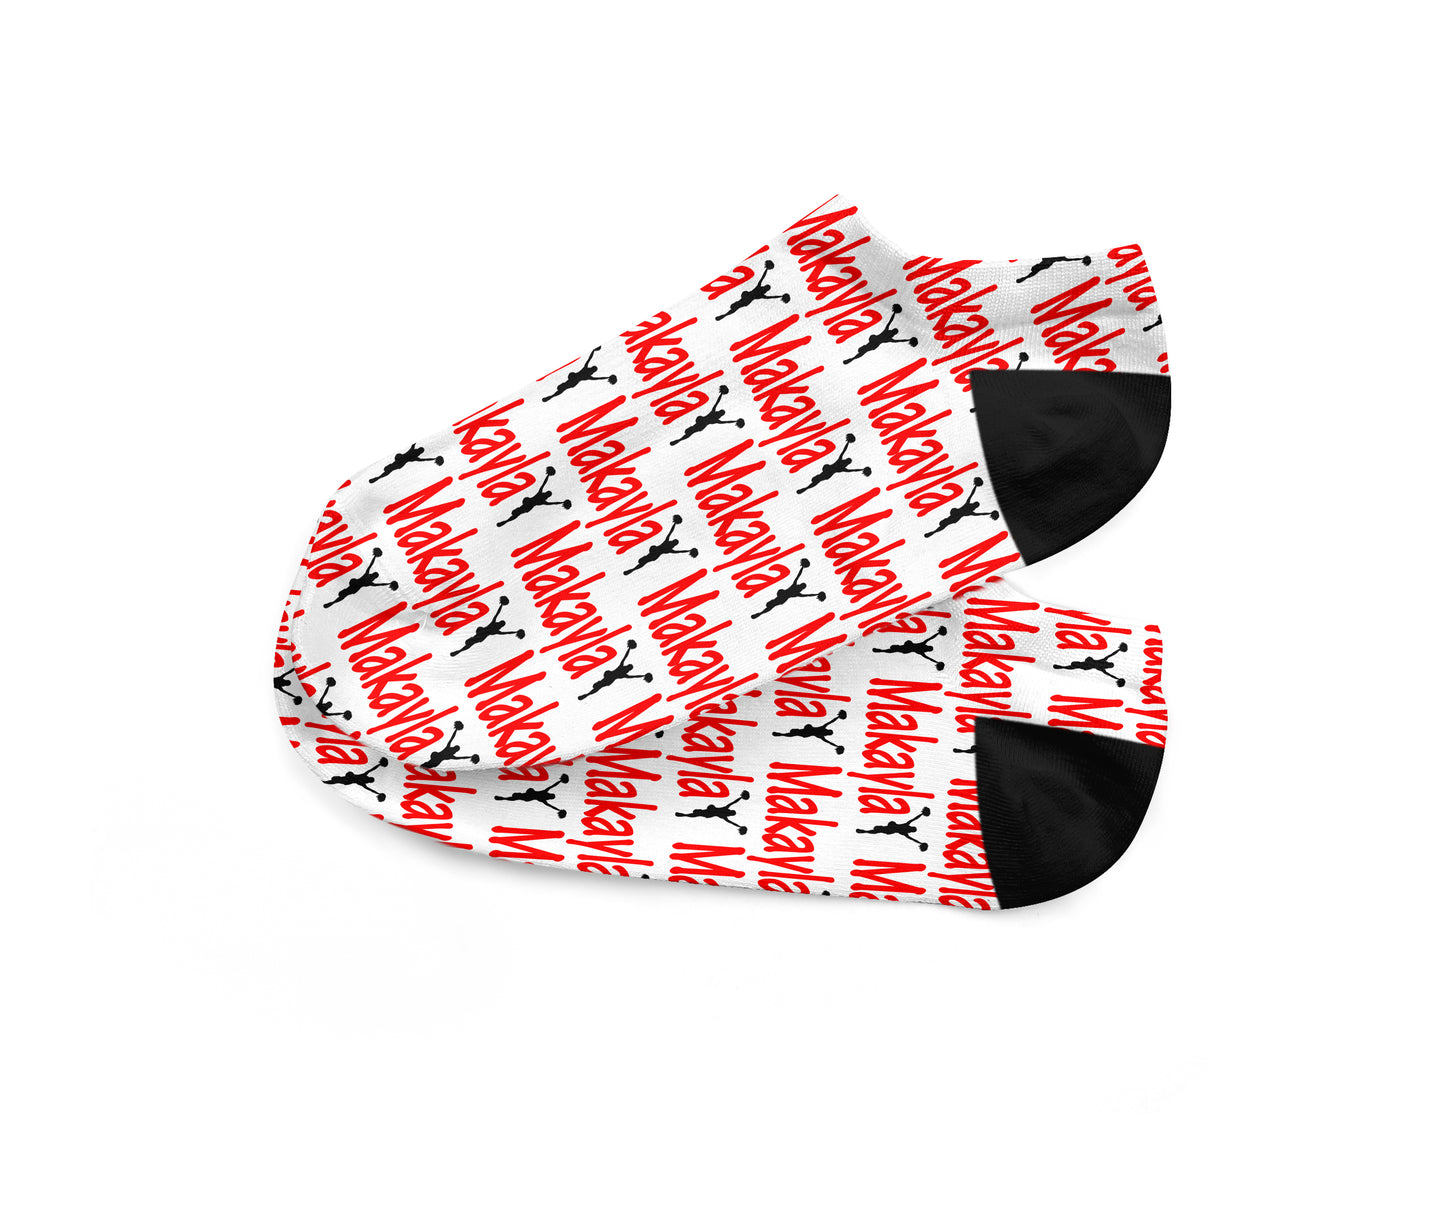 Personalized Cheer Ankle Socks - Fits Sizes 4-10 - Great Team Gift